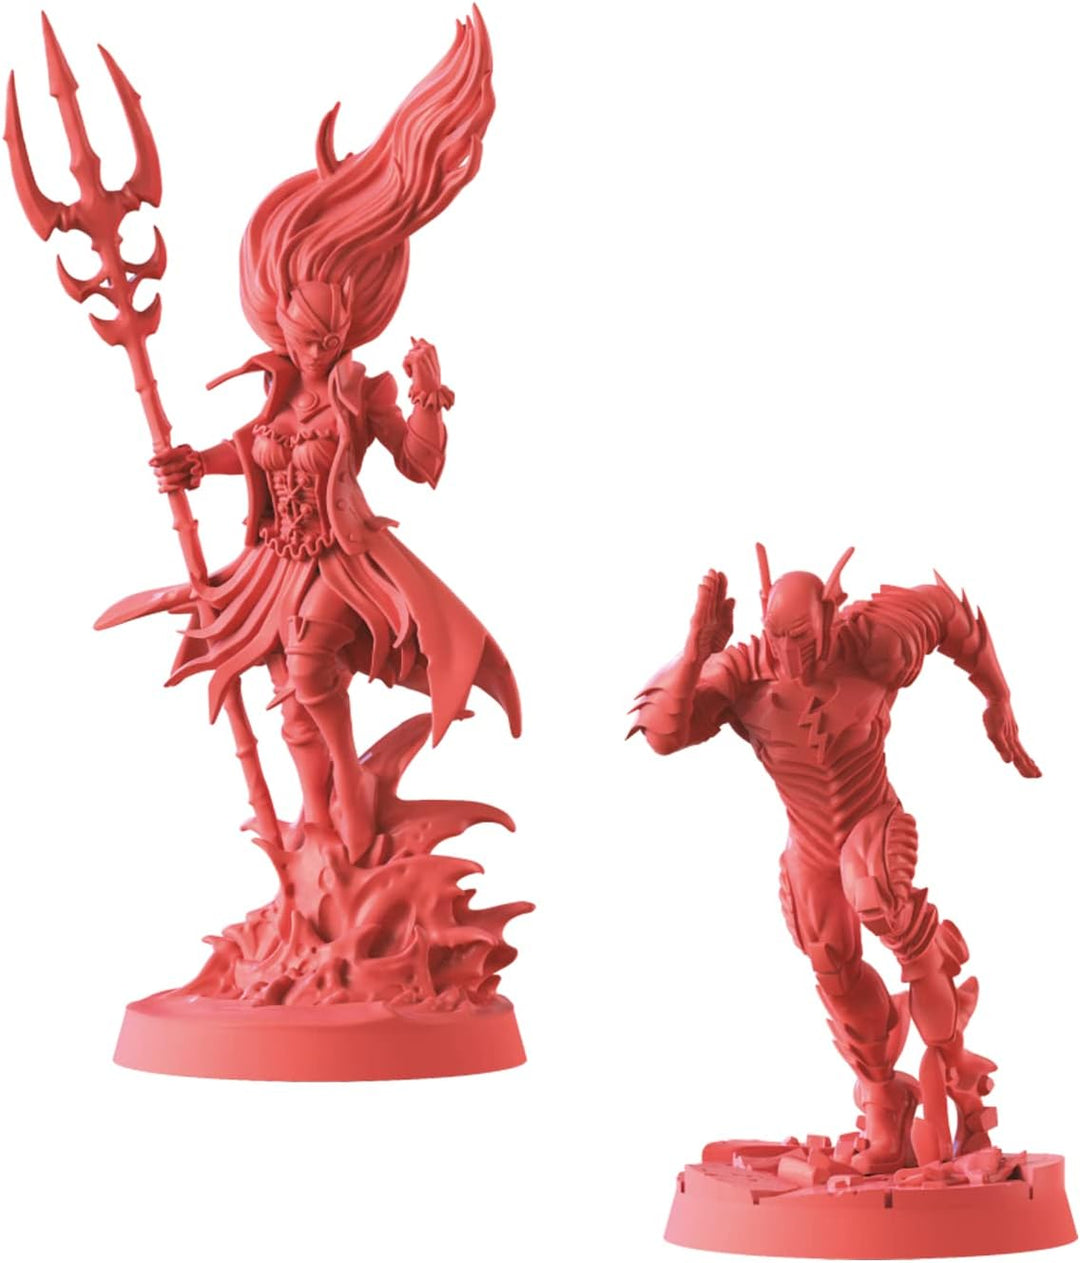 CMON Zombicide Dark Nights Metal Pack #3 | Set of Justice League Miniatures Compatible with Zombicide 2nd Edition Game for Adults